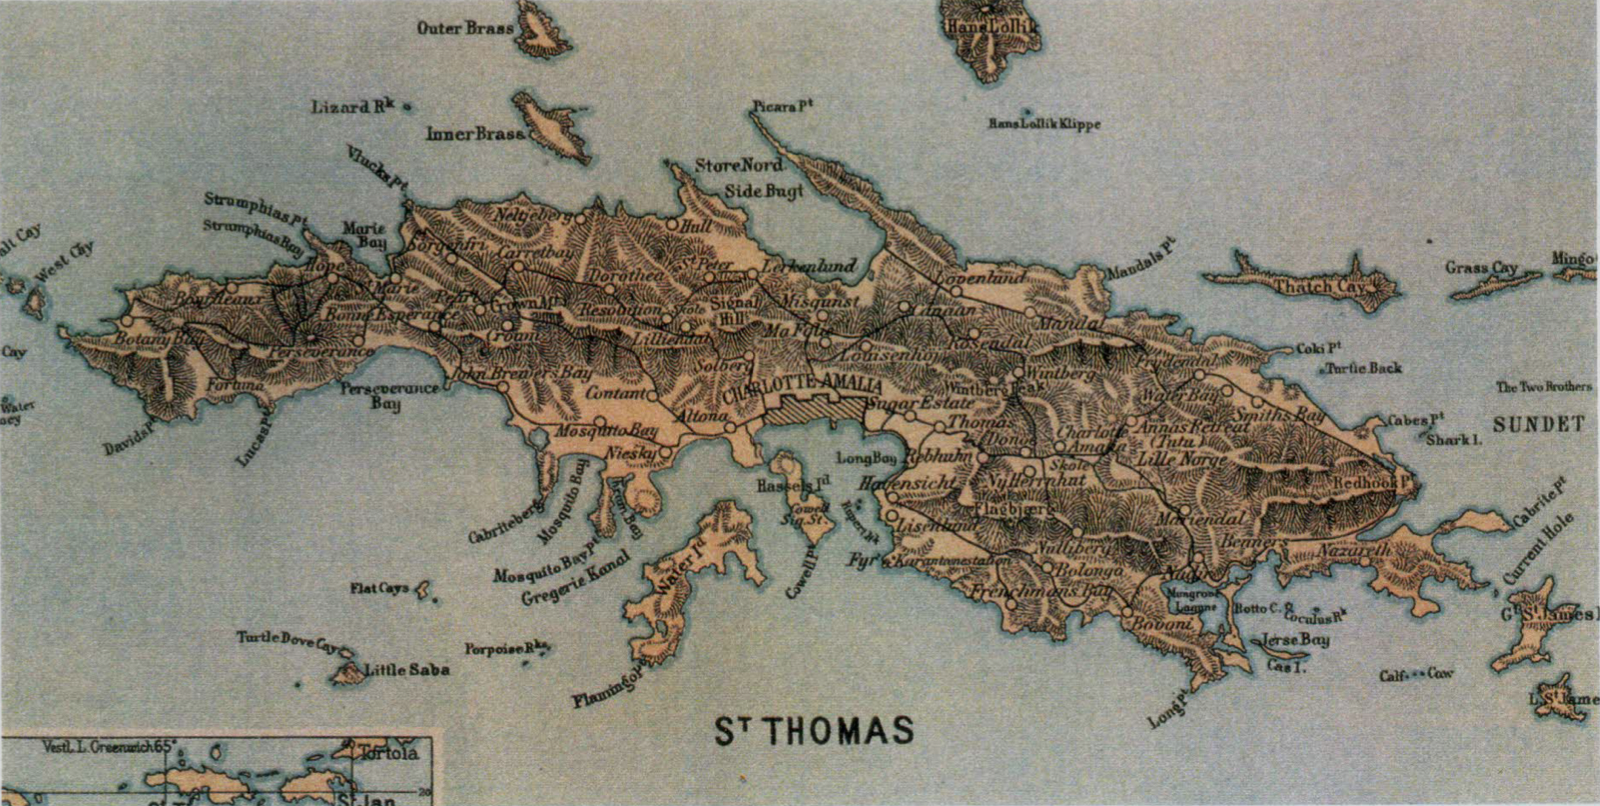 Map of St. Thomas. 1907. A Danish trading company took possession of the small island in 1671. At first the intention was to grow tropical crops like tobacco, cotton, and sugar; but it soon turned out that the mountainous island was not suitable for agriculture. The acquisition of St. Croix in 1733 served these purposes instead, and St. Thomas became a base for trade and shipping. On the large bay on the south side of the island the town of Charlotte Amalie developed. At the head of the bay lies Fort Christiansfort, and beside it the trading center of the town runs along the street Dronningensgade. The settlement continues up into the hills, and highest up above the town at a height of 1,500 feet one can look out over the Caribbean to the south and the Atlantic to the north. (Image courtesy Olasee Davis)